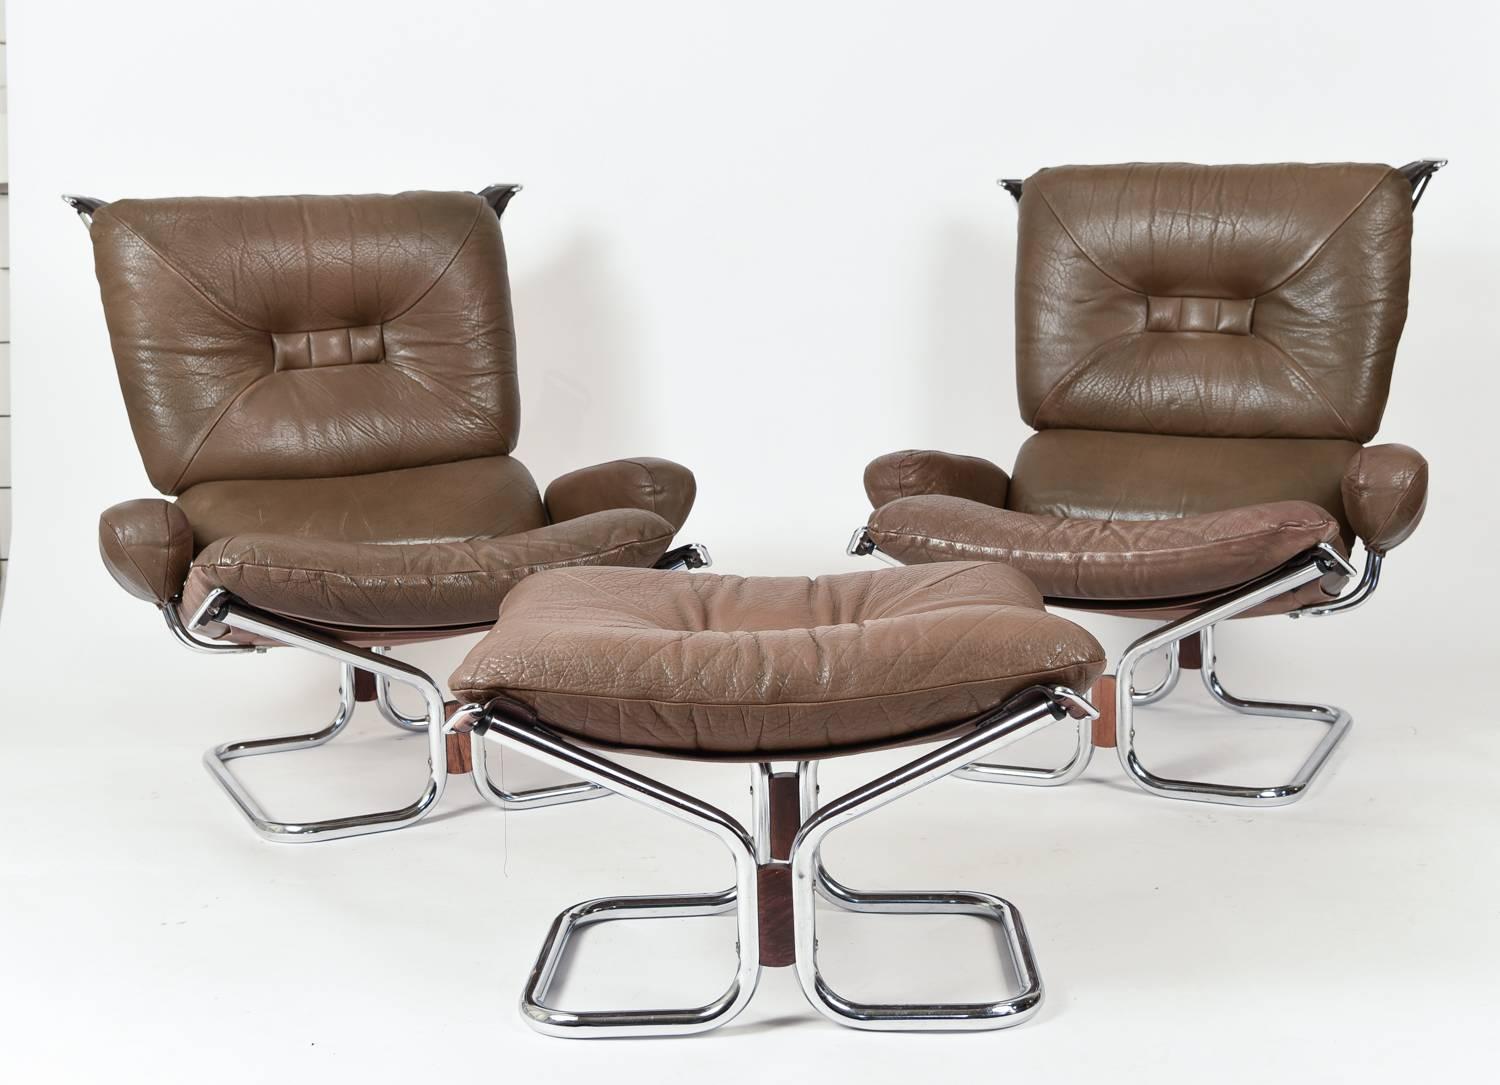 A beautiful and comfortable pair of sling chairs including the hard to find ottoman by Harald Relling. These iconic Danish chairs will be the focal point in any room.